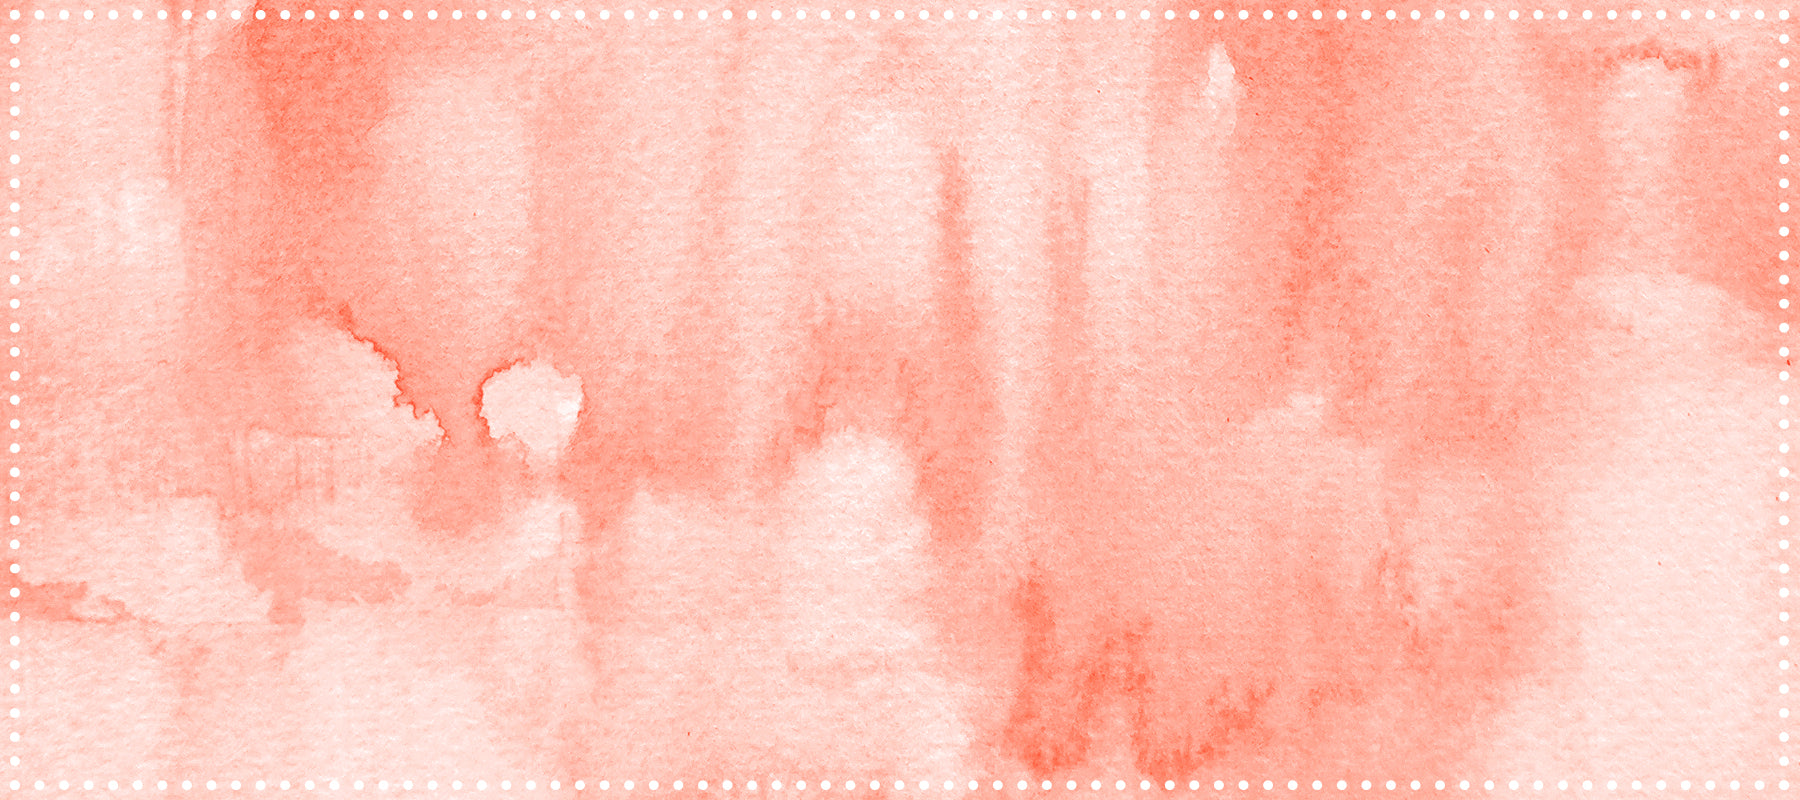 A textured abstract watercolor image featuring shades of coral and pink with soft gradients and bleeding effects on paper.